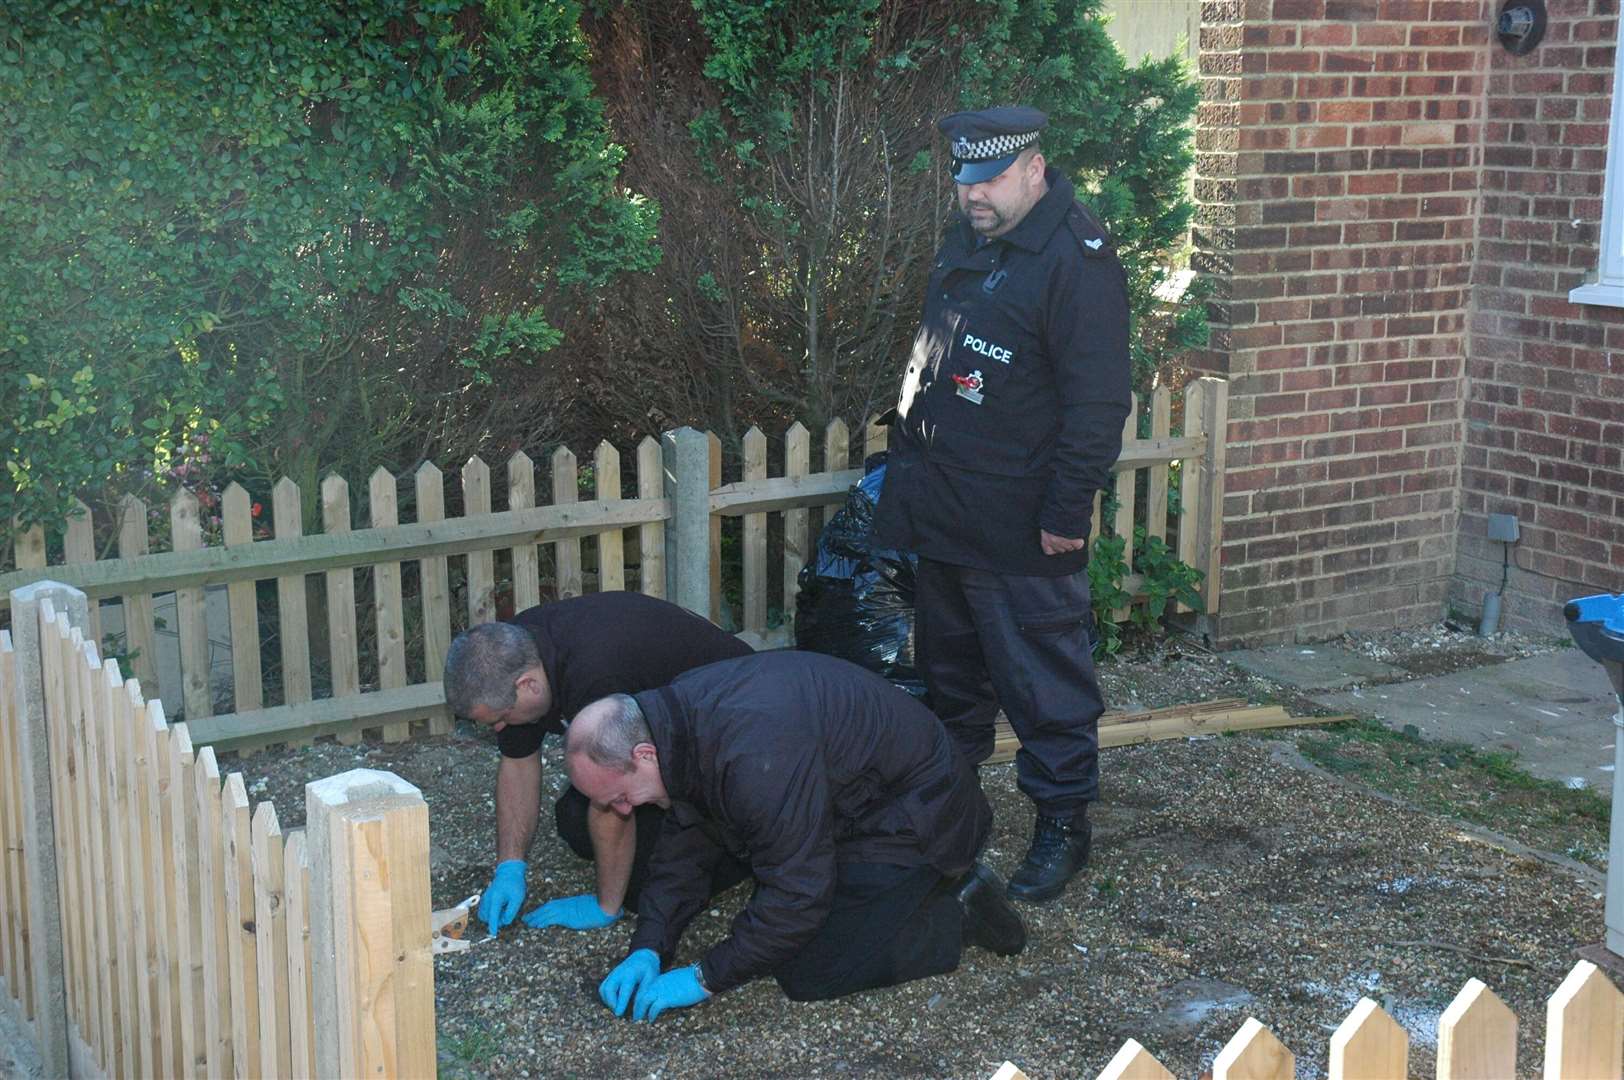 Police were called to investigate the garden of the property in Margate once owned by the notorious Peter Tobin in 2007